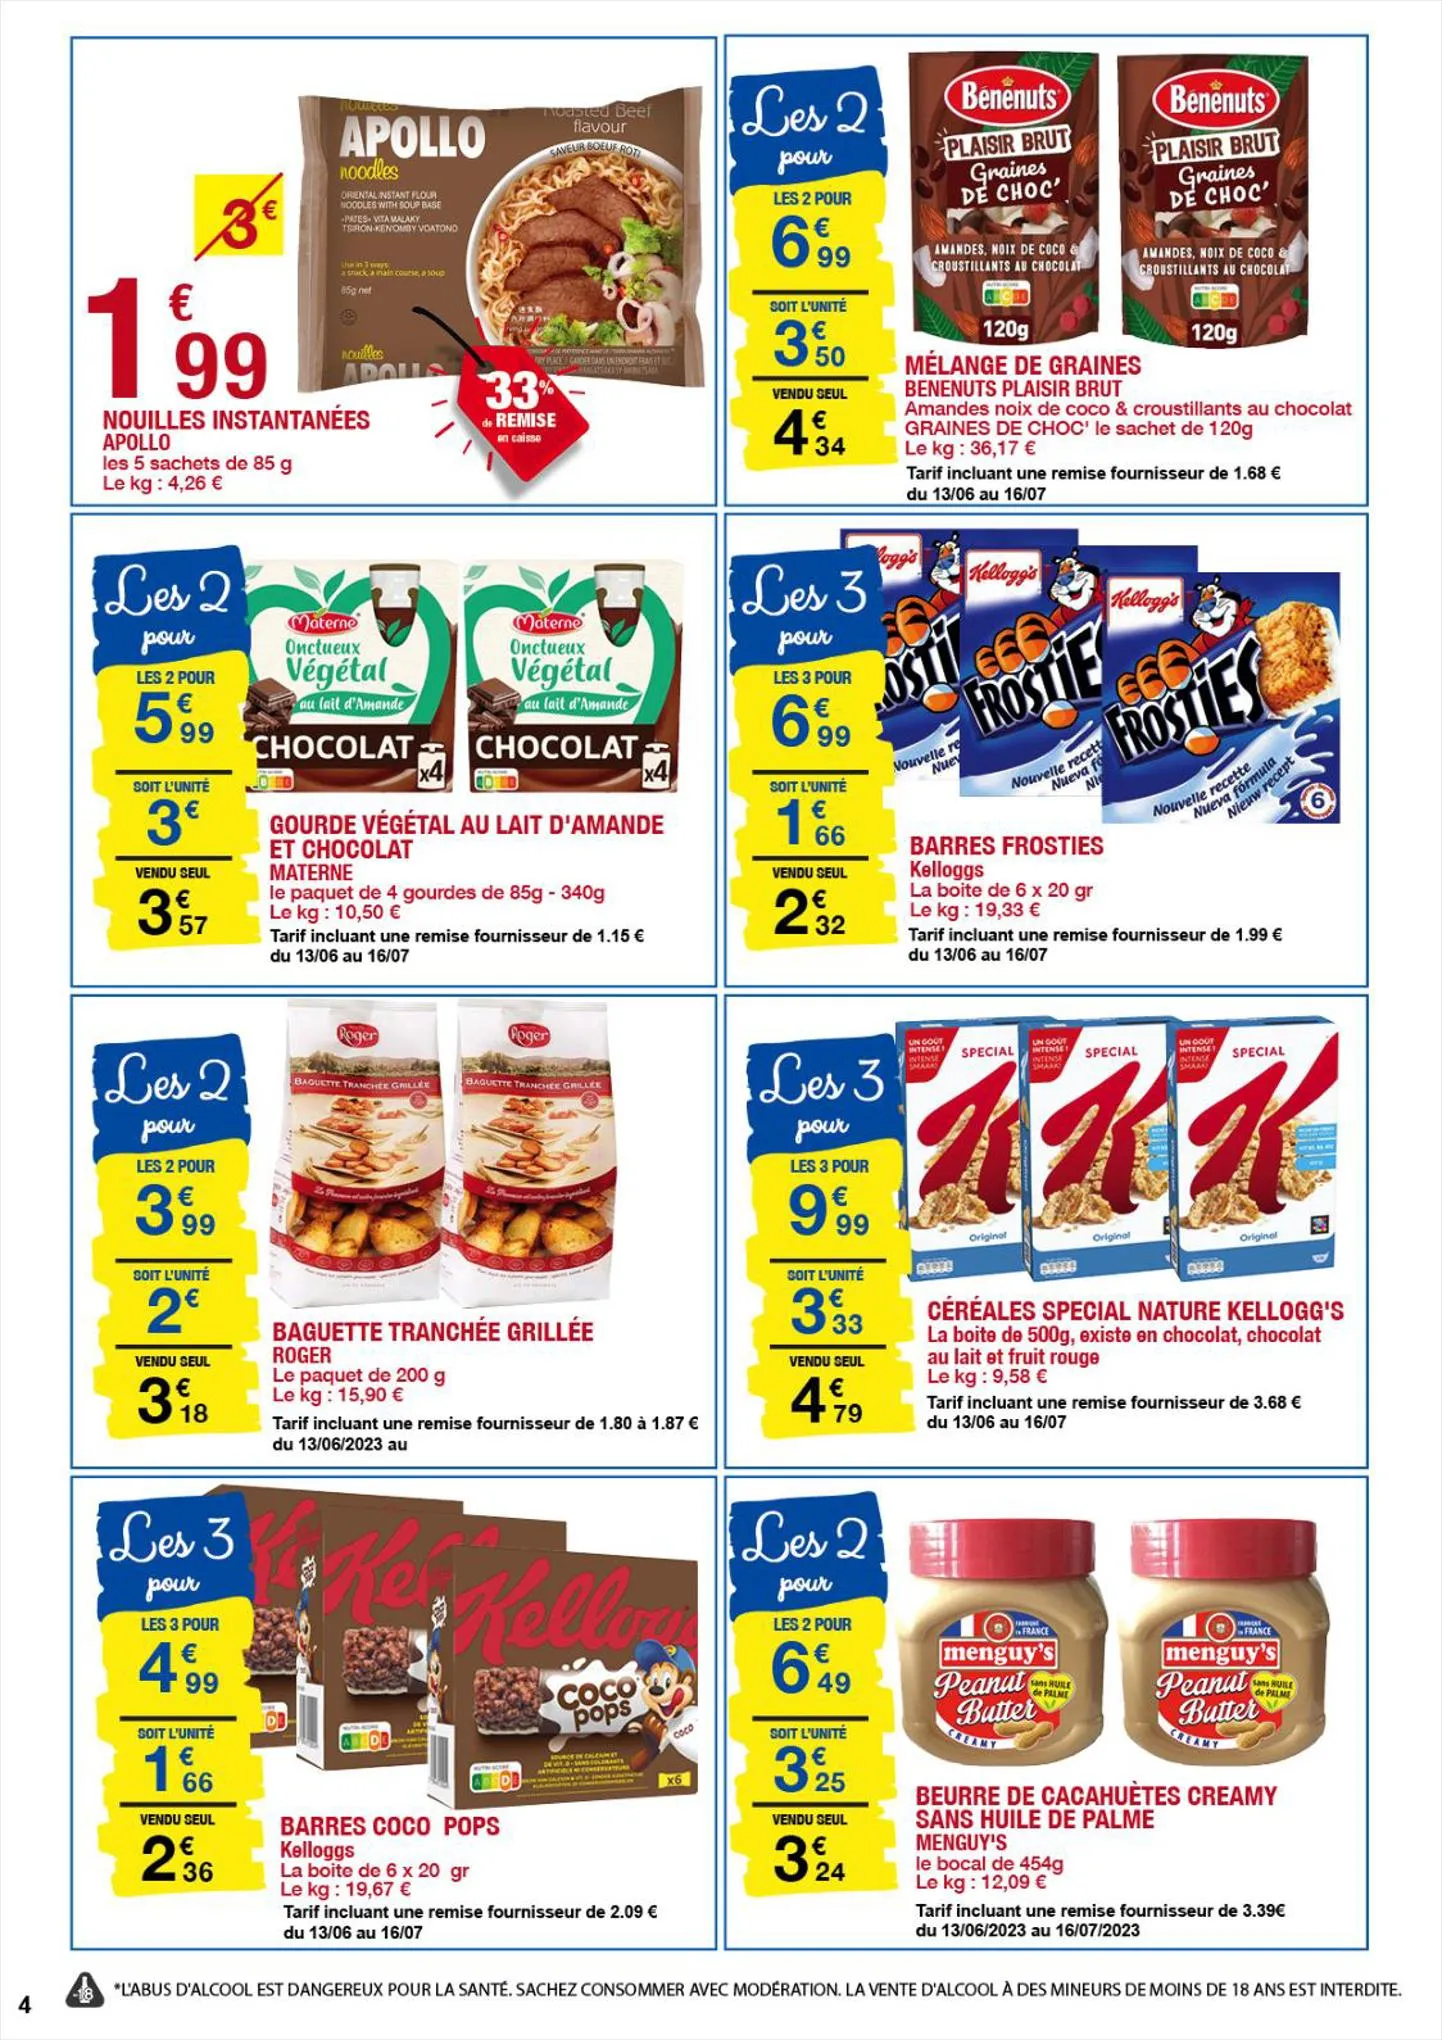 Catalogue Carrefour crf-OP CACI 6316, page 00004